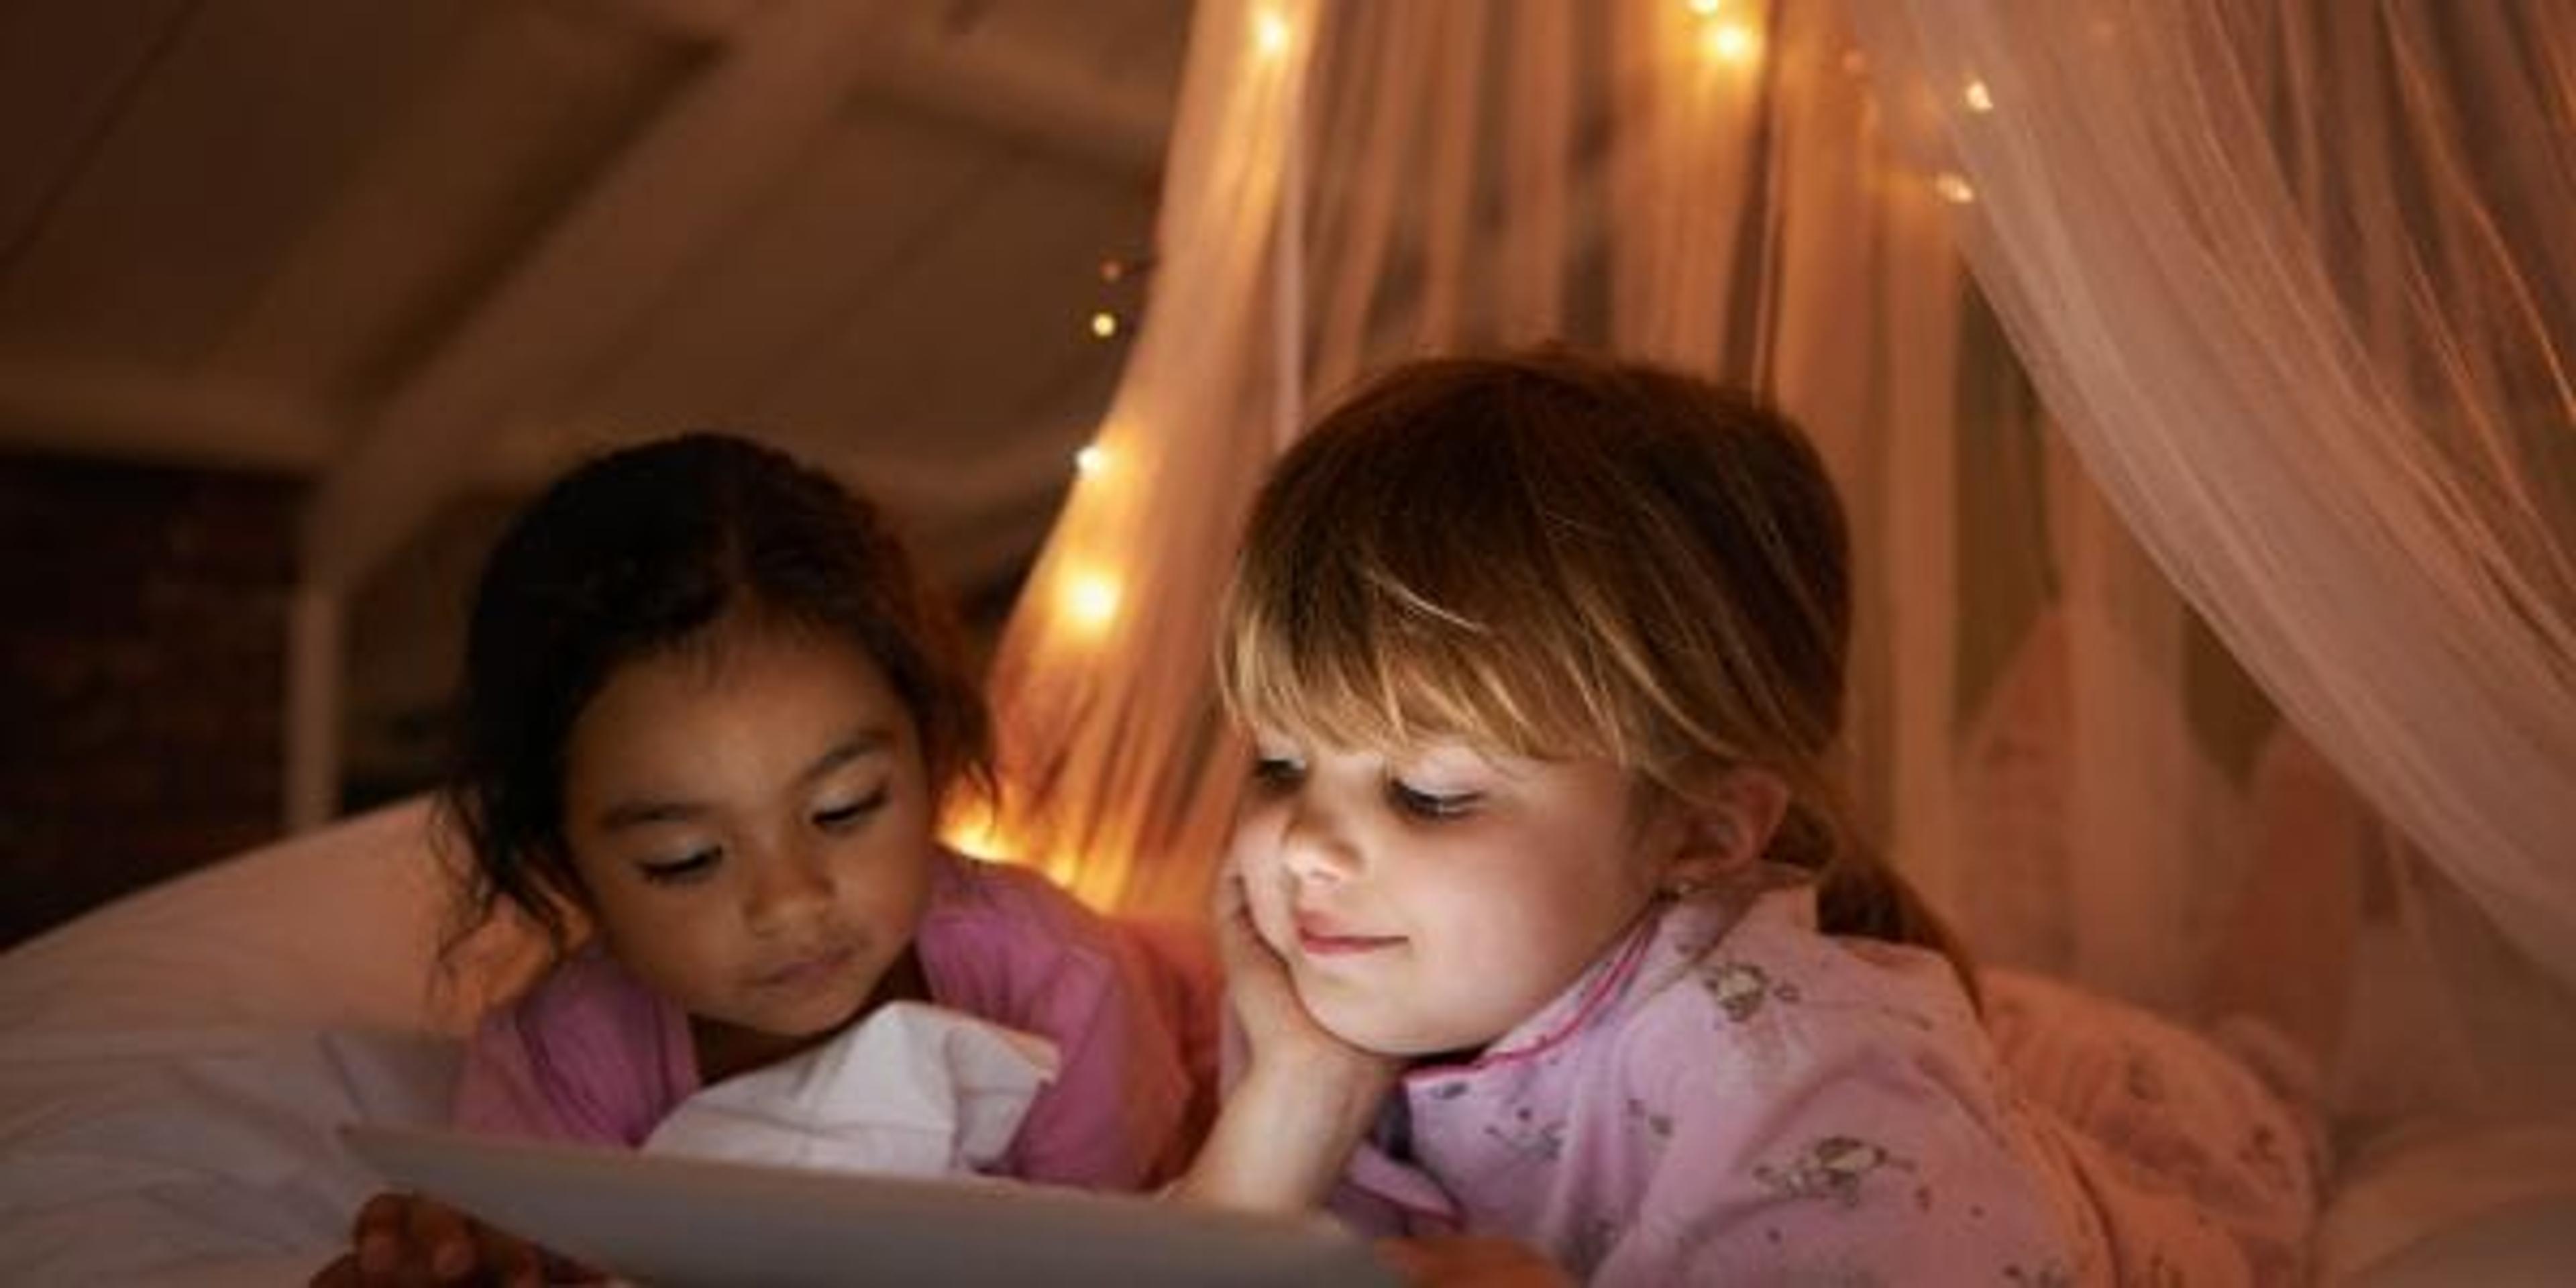 Two girls reading at night on a bed